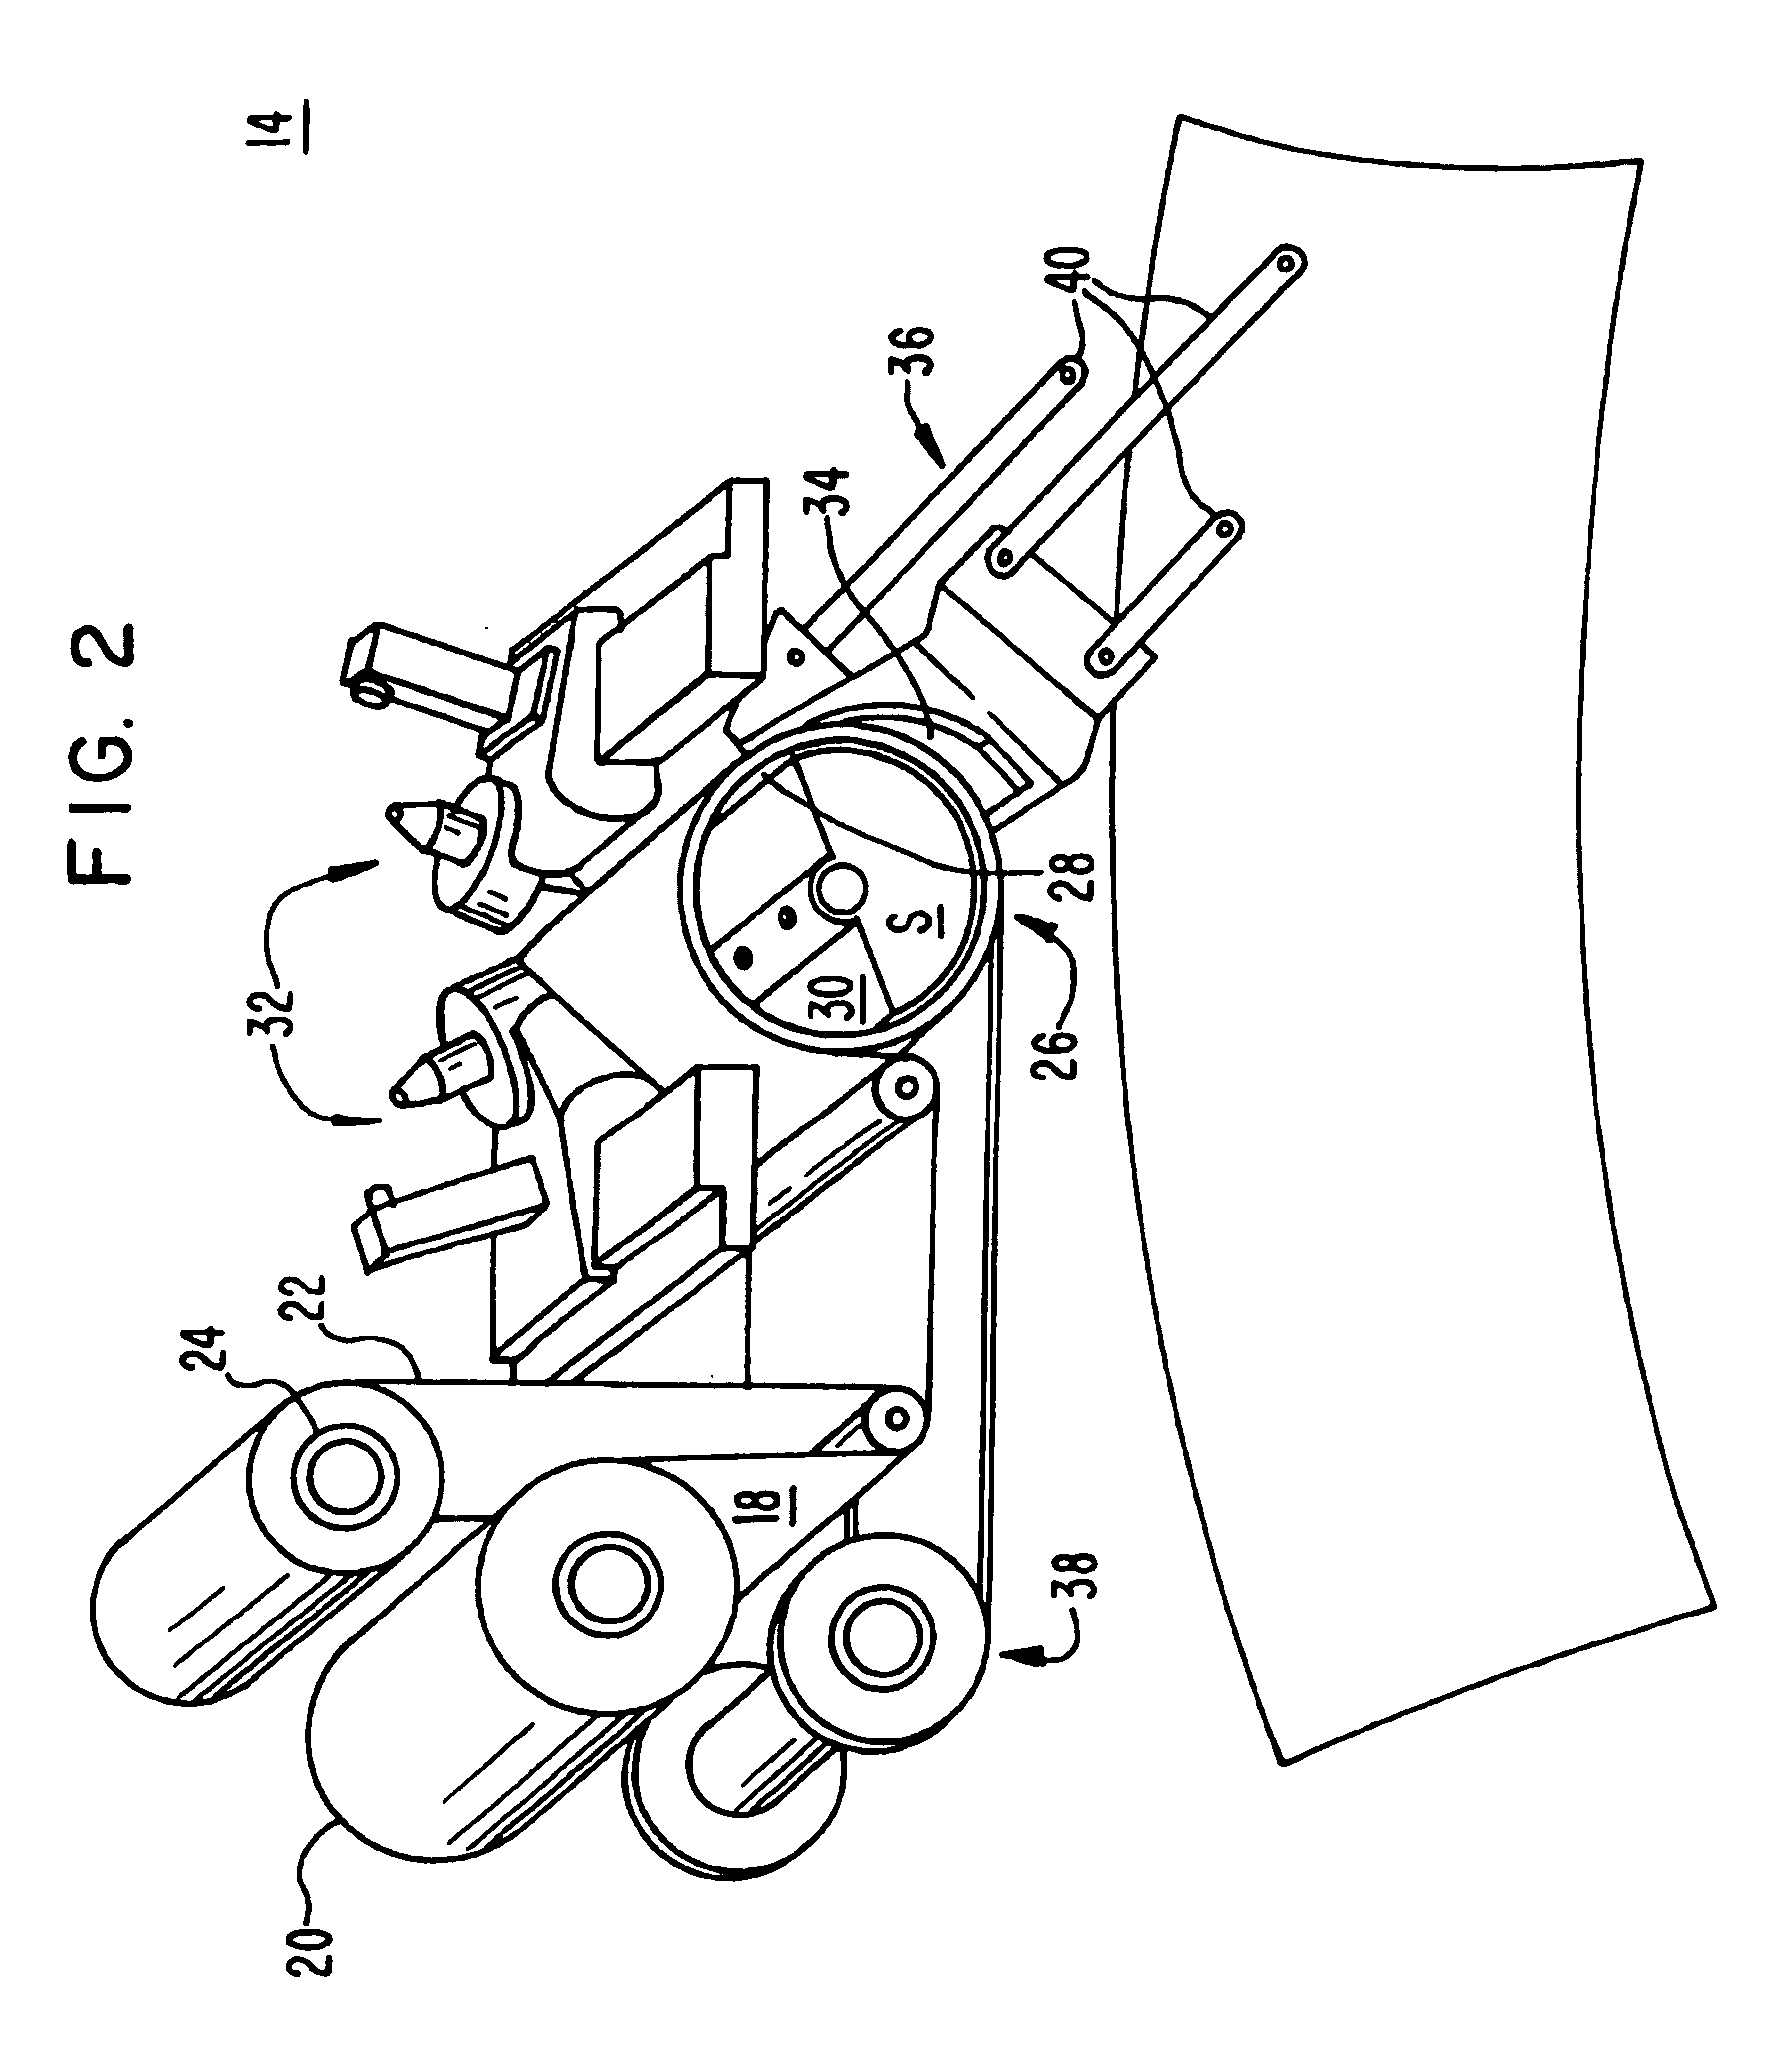 Automated fabric layup system and method